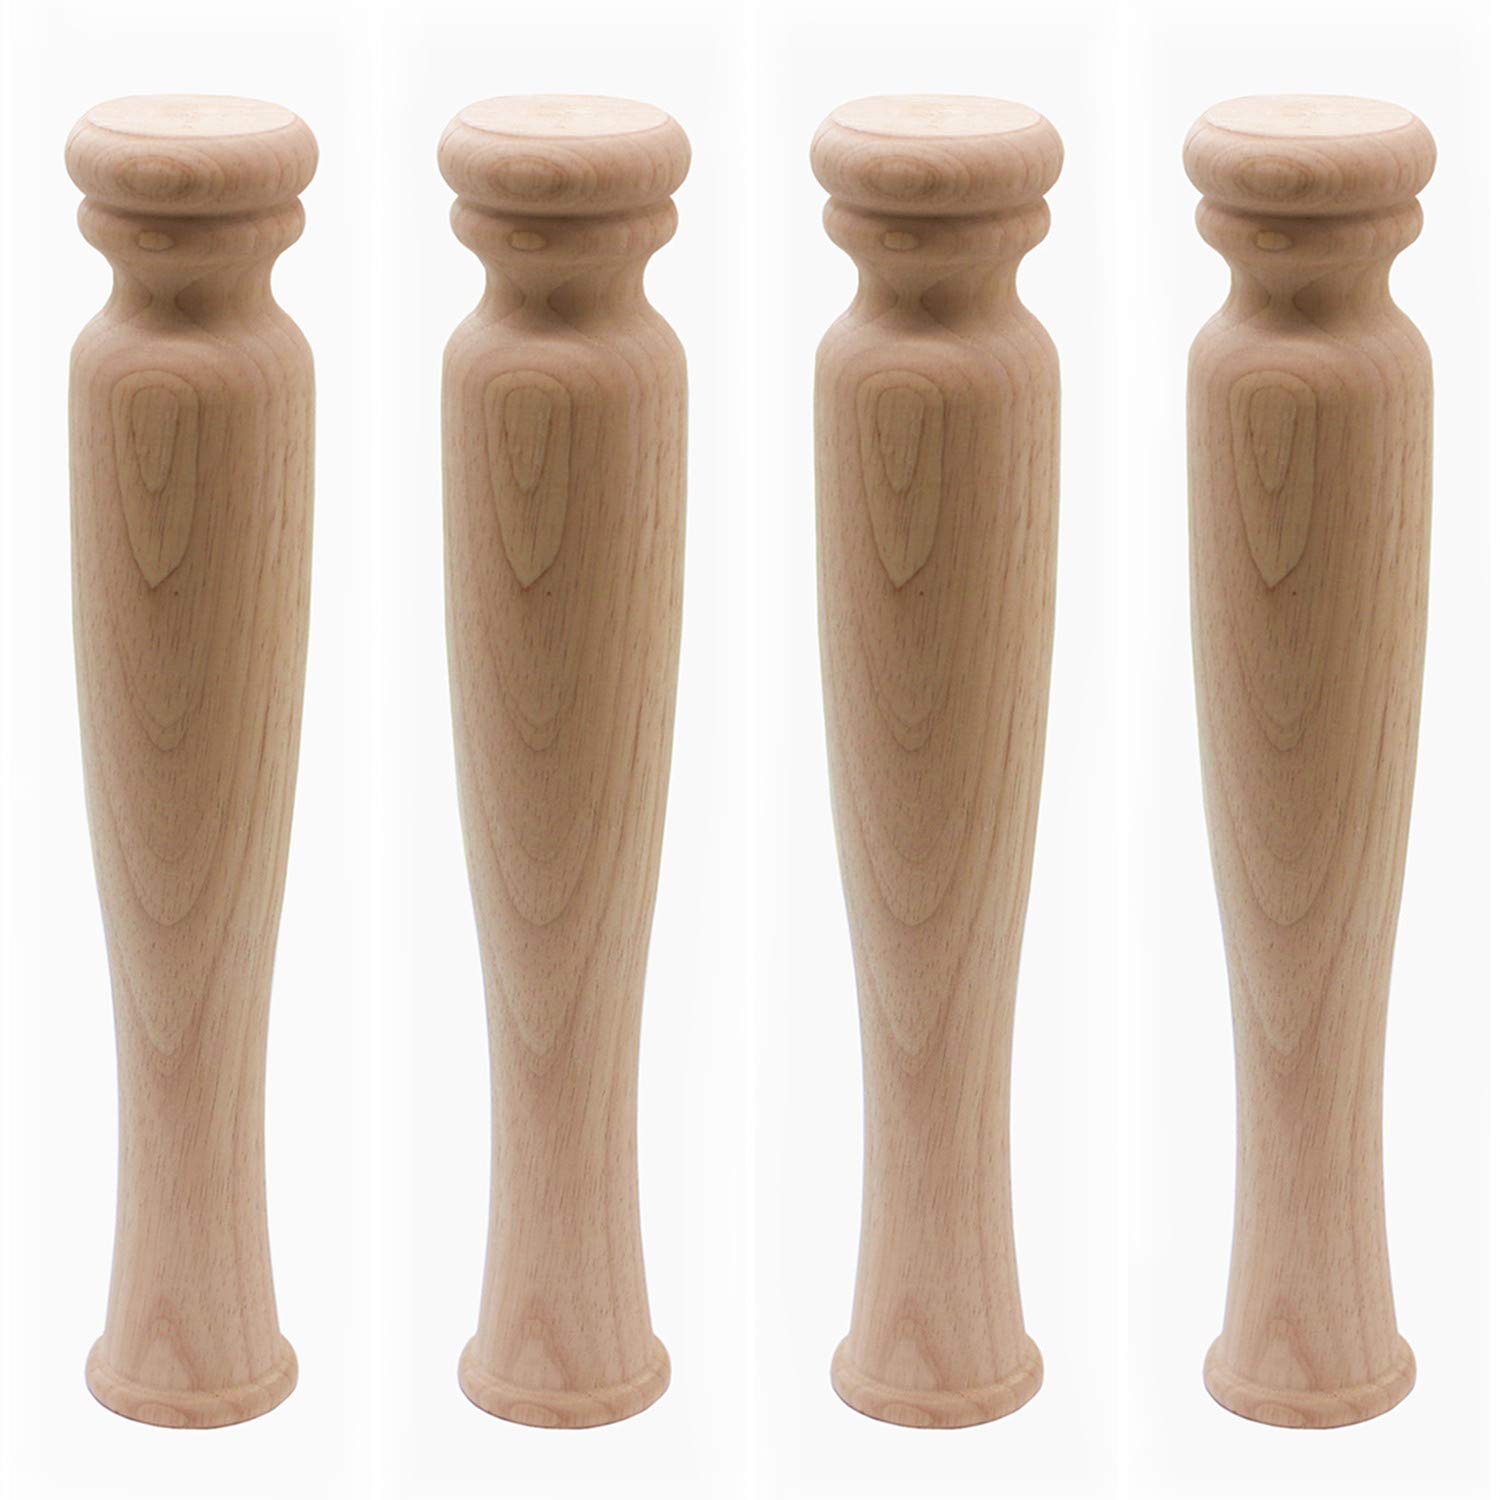 14" Solid Unfinished Rubber Wood Furniture Legs Replacement Bench Legs Coffee Table Legs